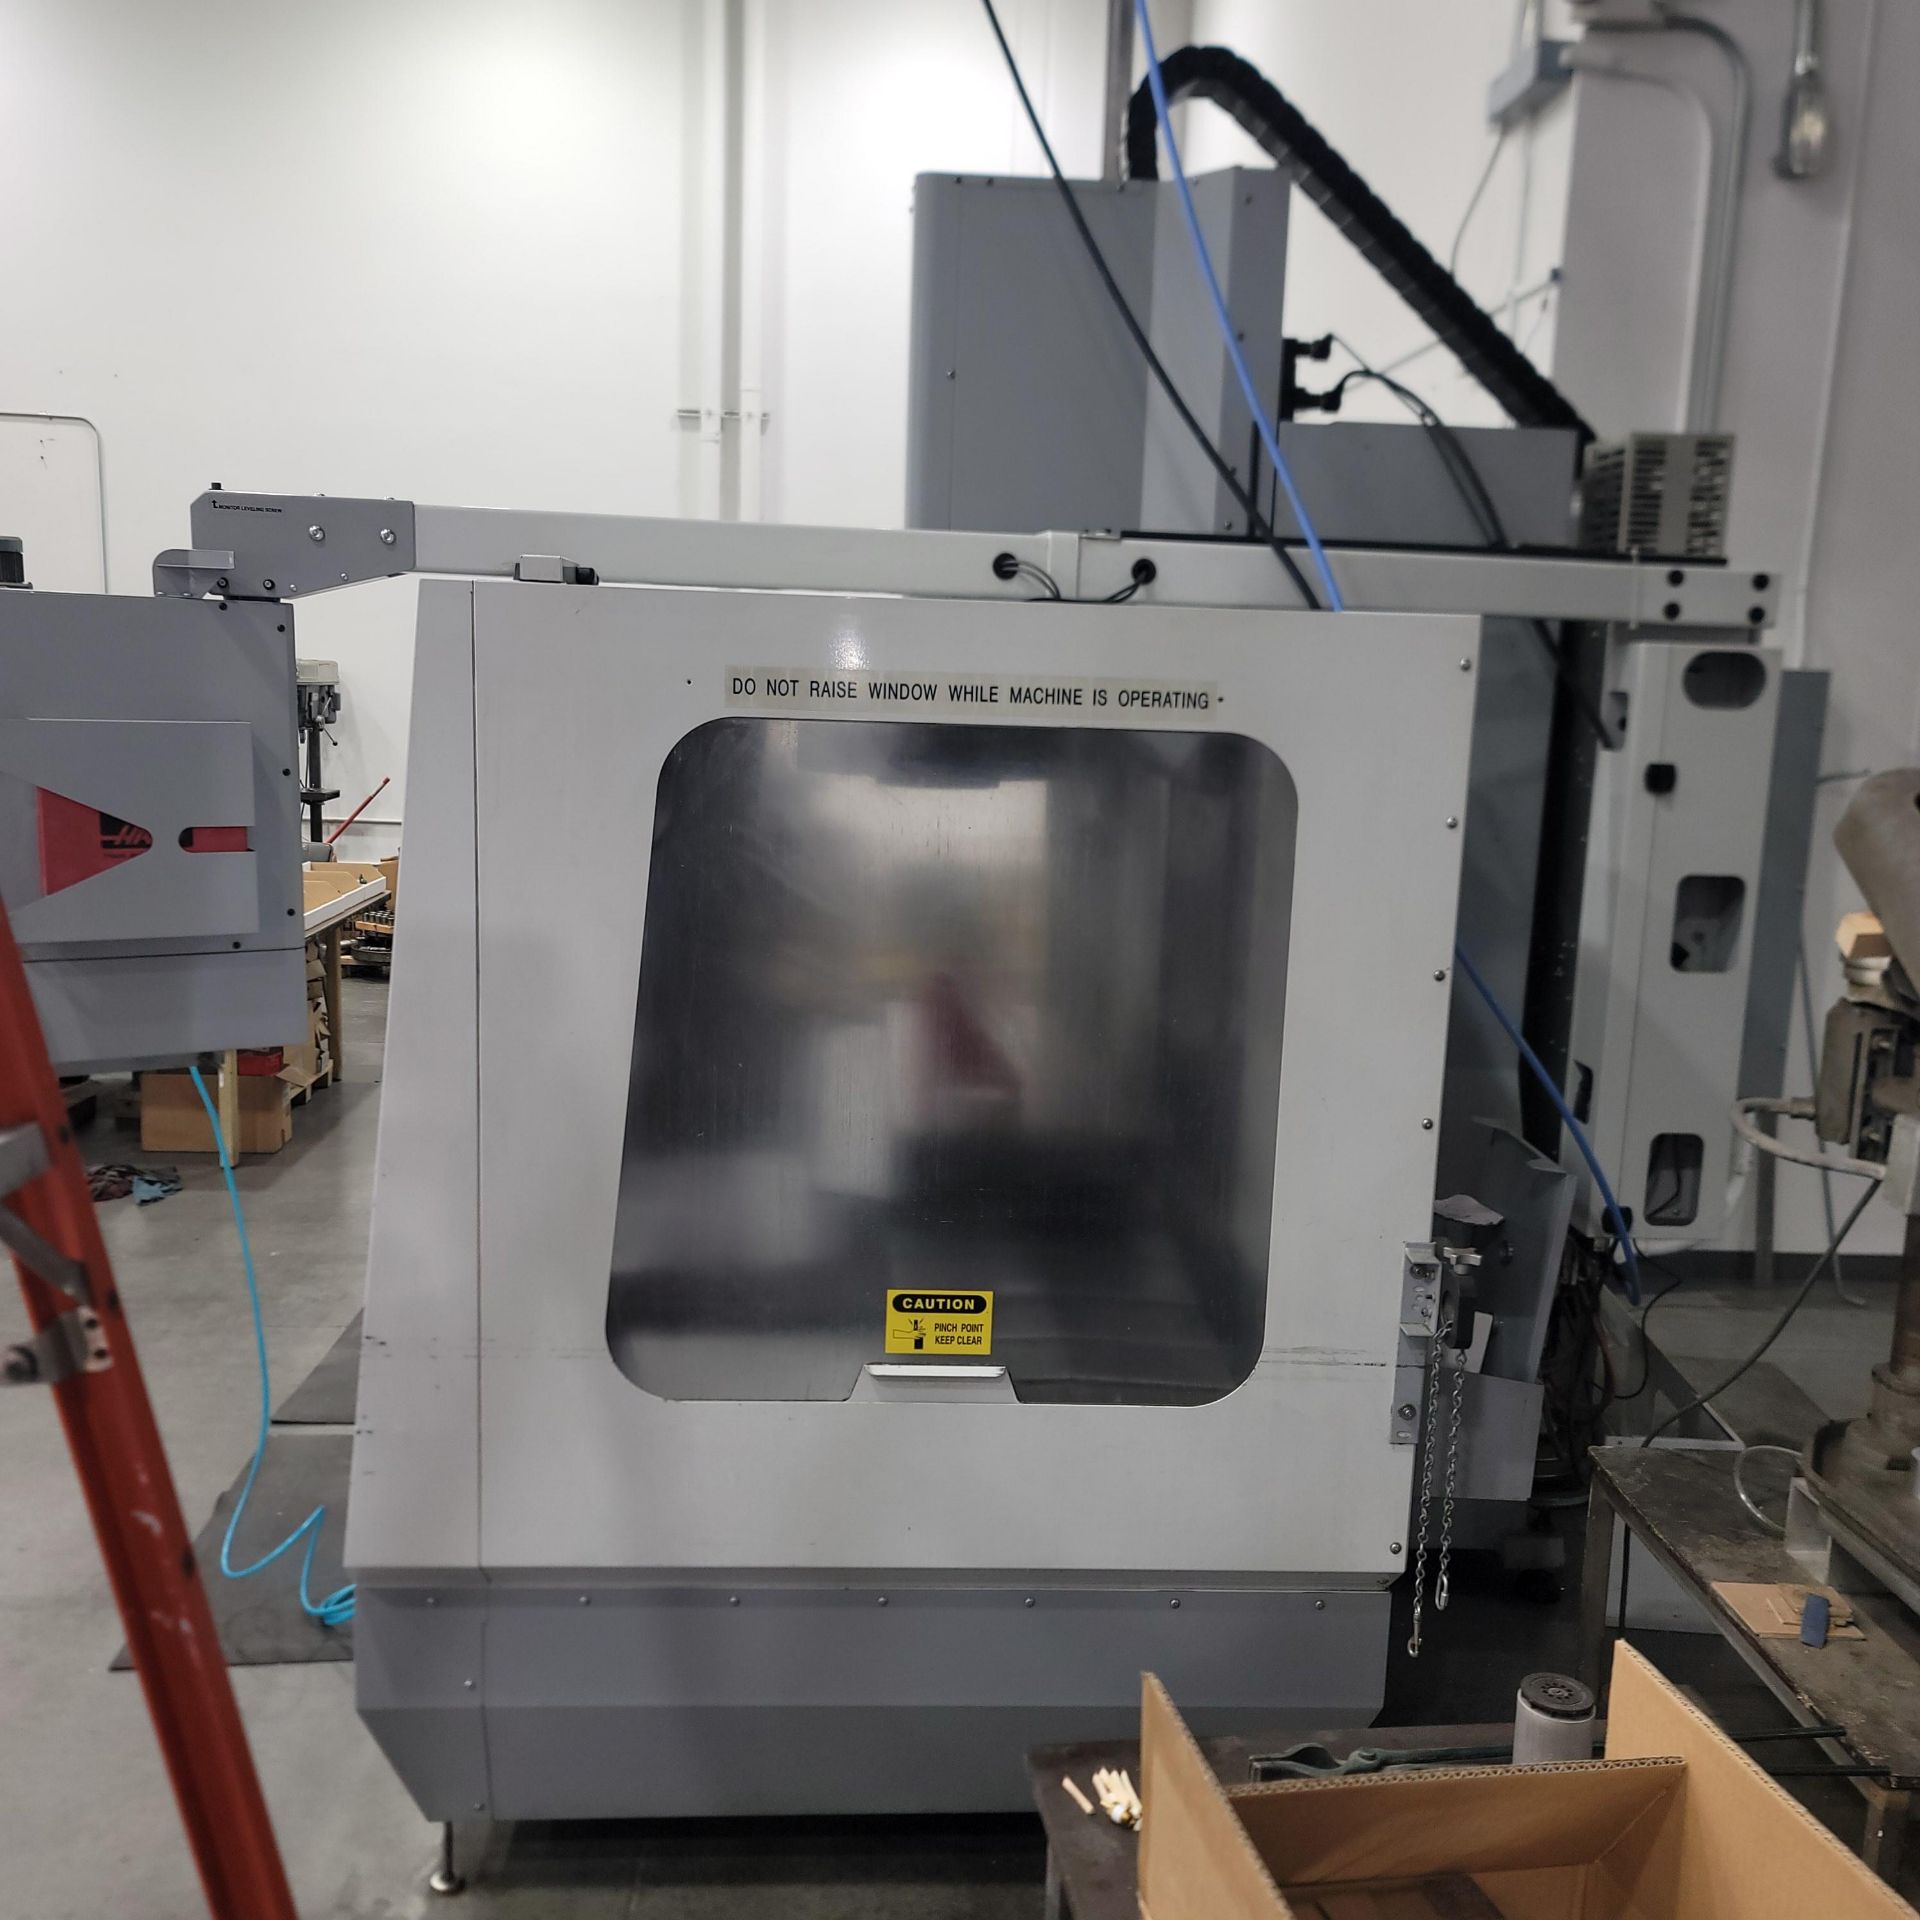 2003 HAAS VF-4D VERTICAL MACHINING CENTER, XYZ TRAVELS: 50" X 20" X 25", TABLE SIZE: 52" X 18", - Image 6 of 10